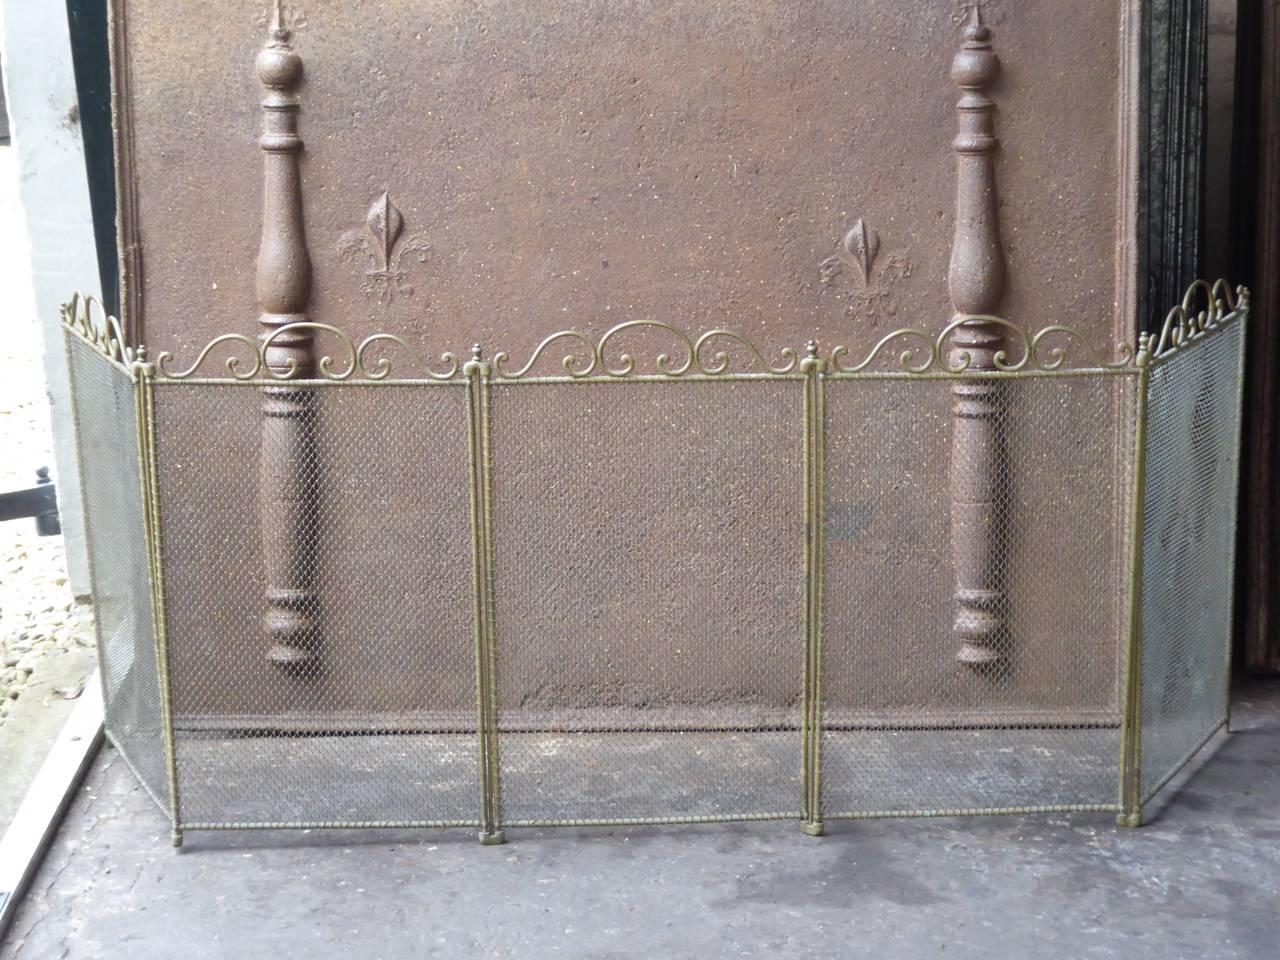 French Art Nouveau fireplace screen made of brass and iron mesh.

We have a unique and specialized collection of antique and used fireplace accessories consisting of more than 1000 listings at 1stdibs. Amongst others we always have 300+ firebacks,